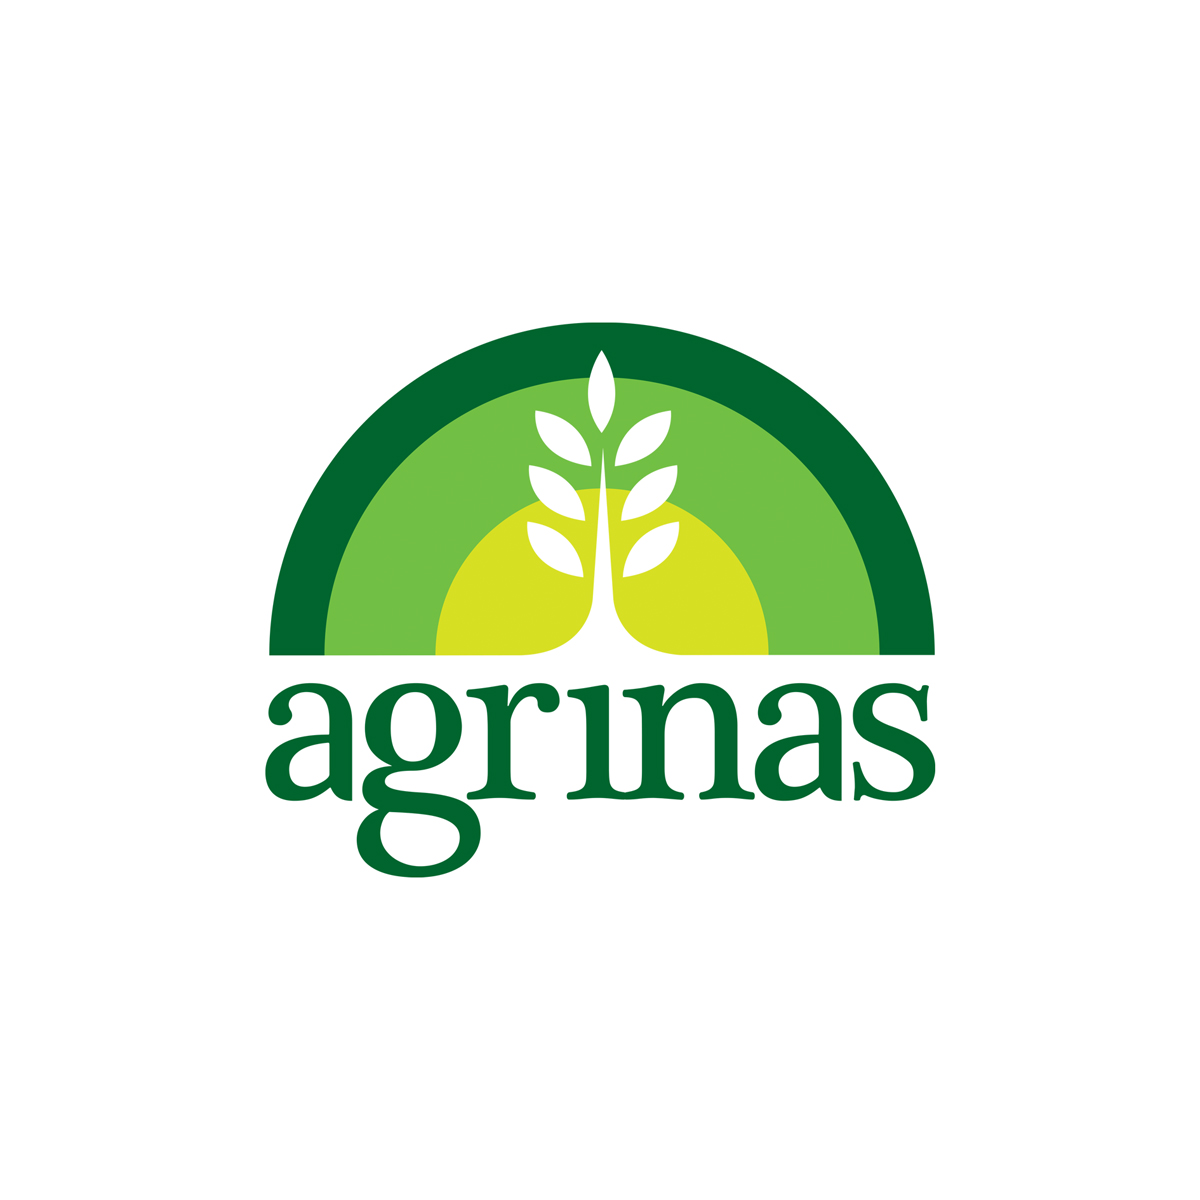 Agrinas Market Official Store